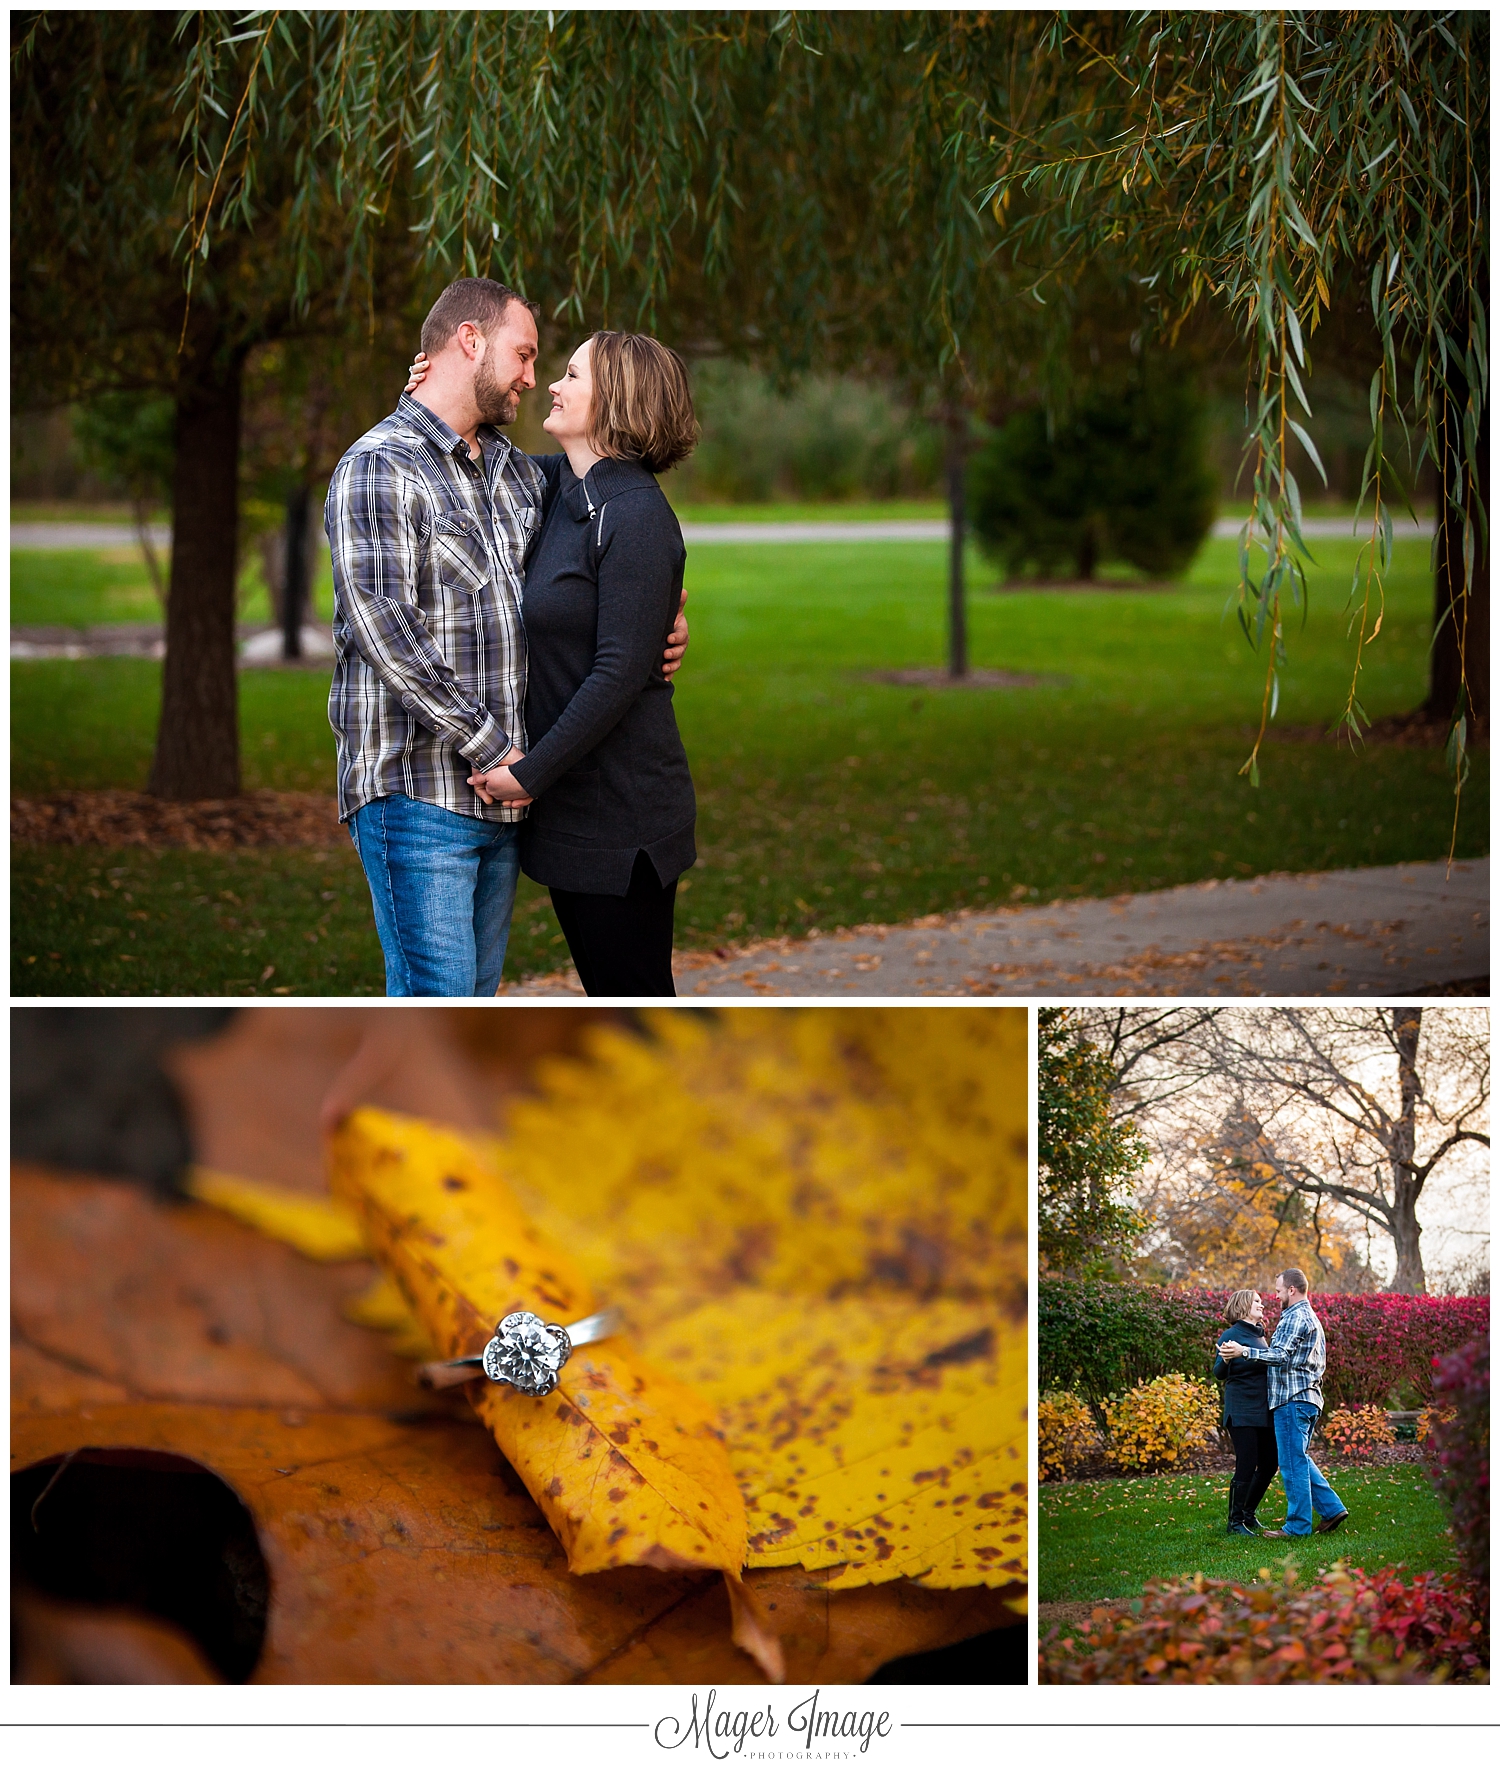 ring bling fall leaves macro canon shooter engagement session fall colors